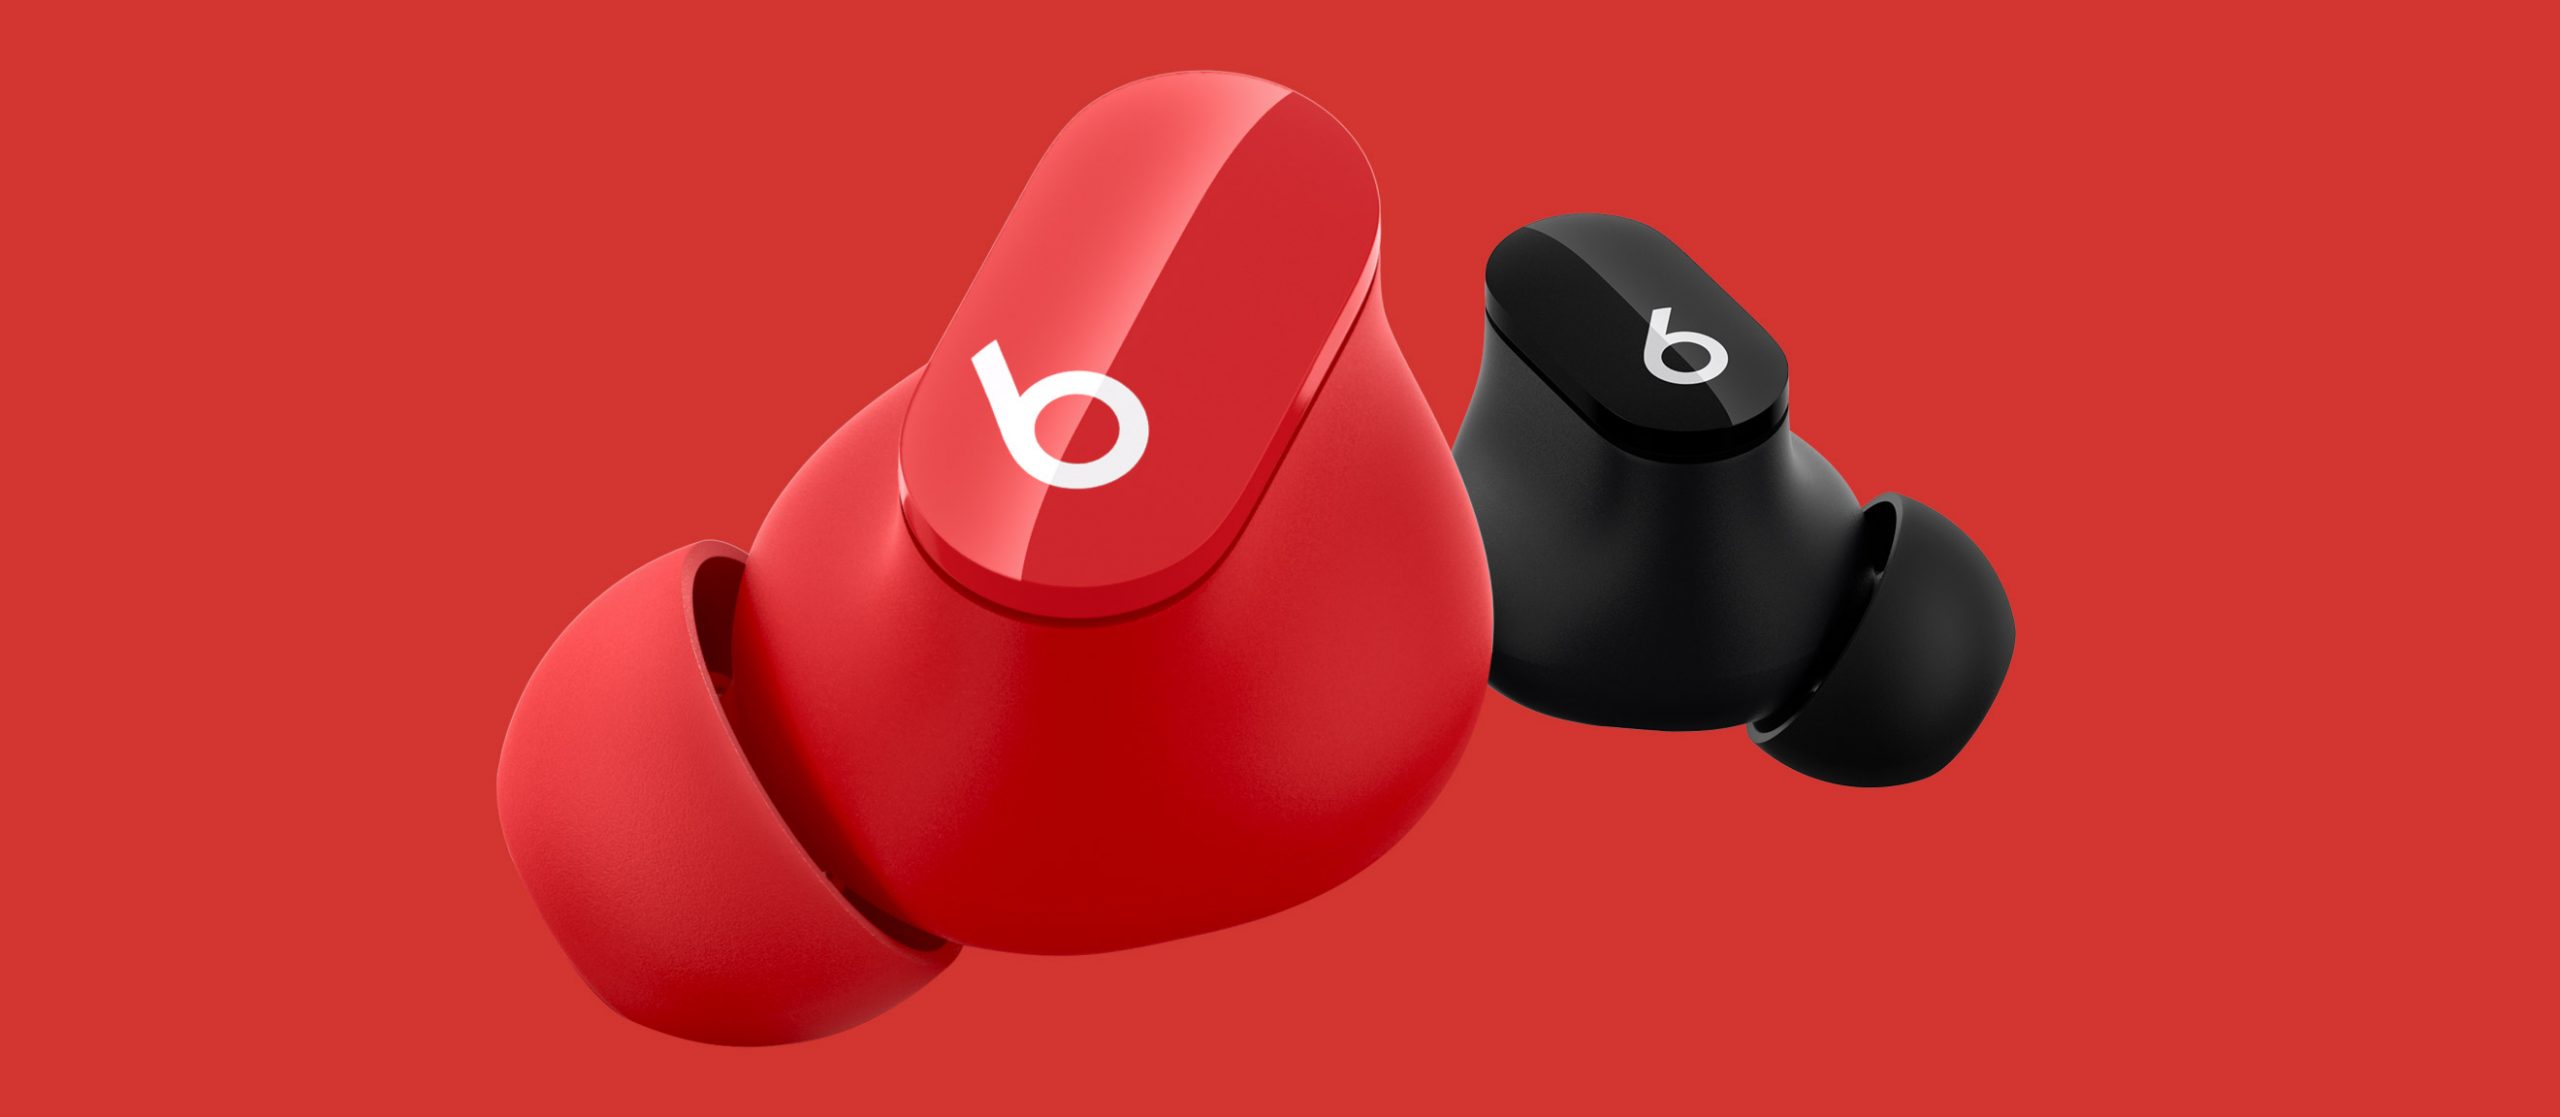 Beats Studio Buds – Apple’s $150 true wireless noise cancelling earbuds that play nice with Android too